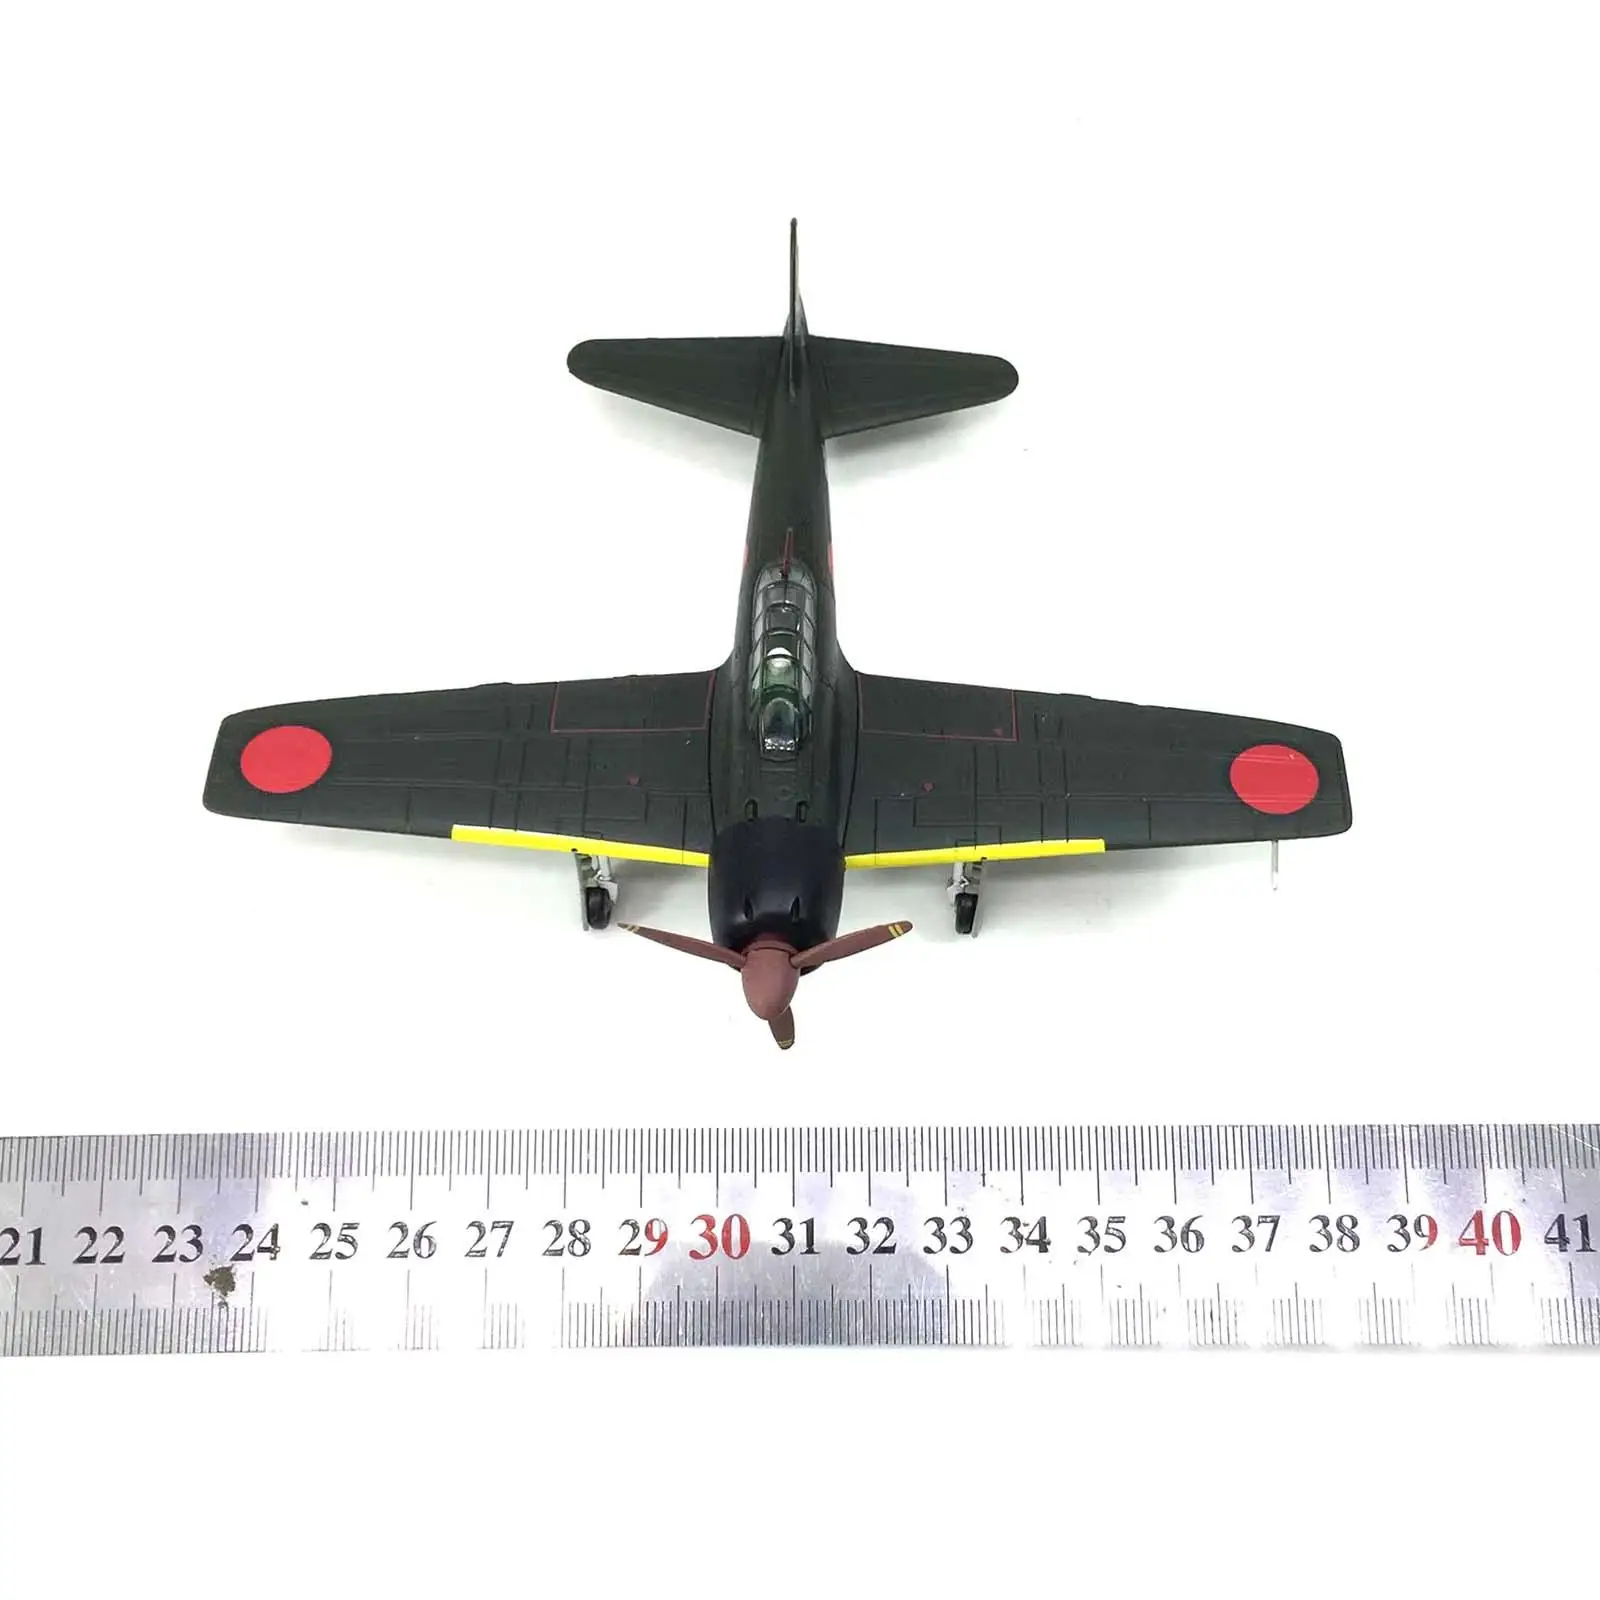 1:72 Static Aviation Airplane Metal Toys Chic Gifts Collection Decoration Durable Plane Aircraft Aviation Model for Boys Girls